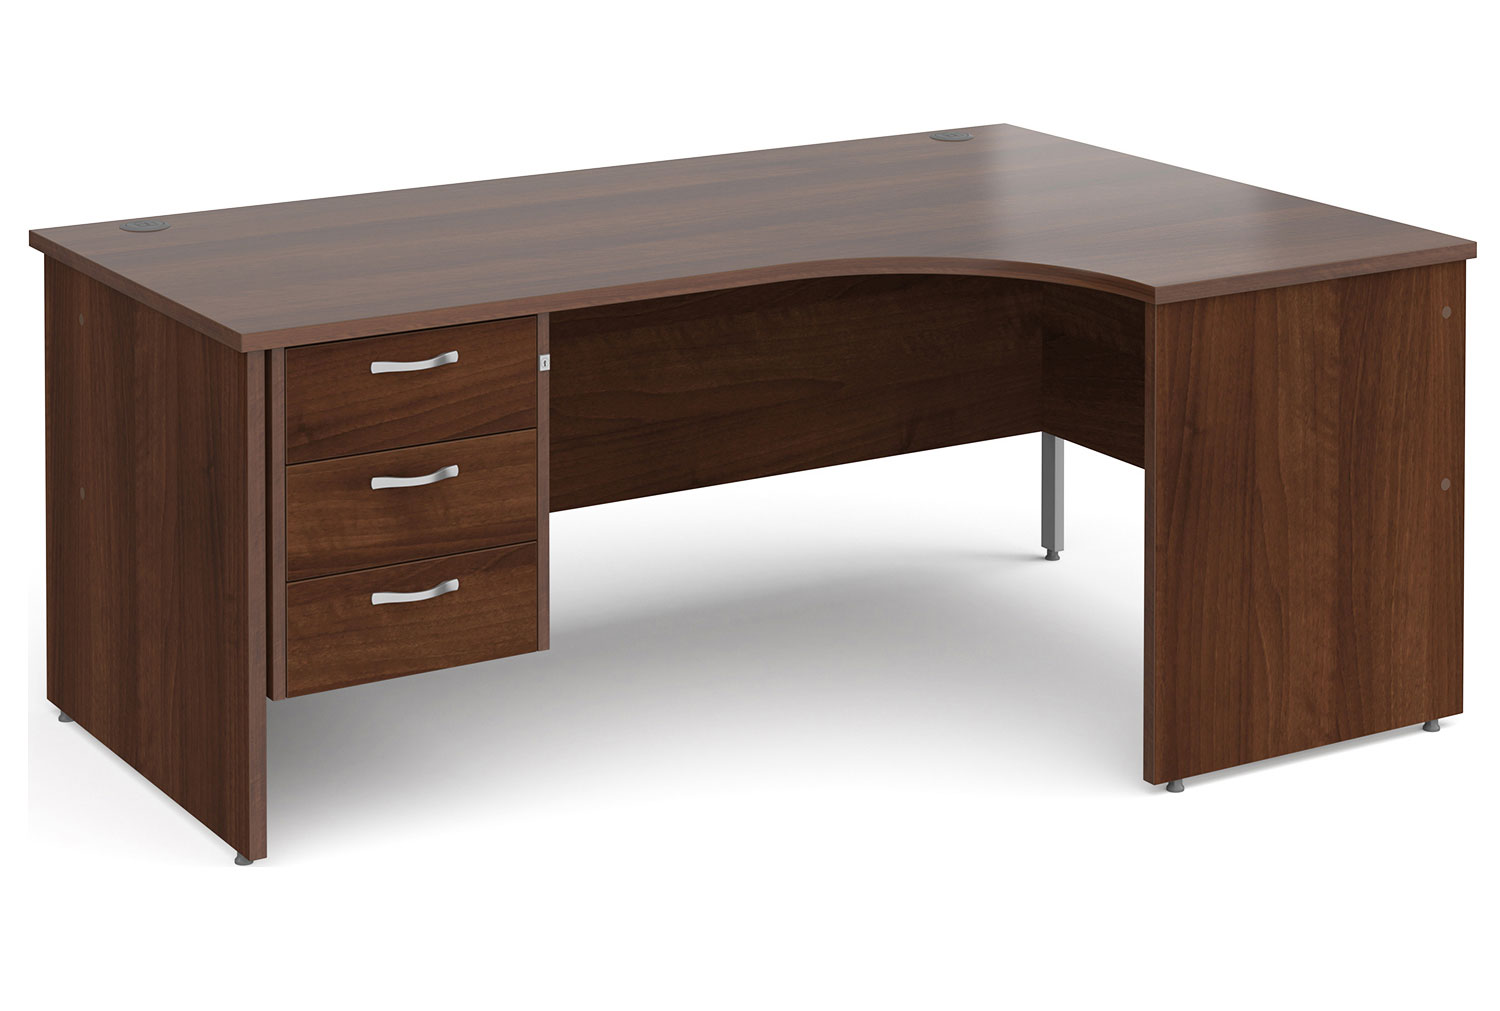 Tully Panel End Right Hand Ergonomic Office Desk 3 Drawers, 180wx120/80dx73h (cm), Walnut, Express Delivery